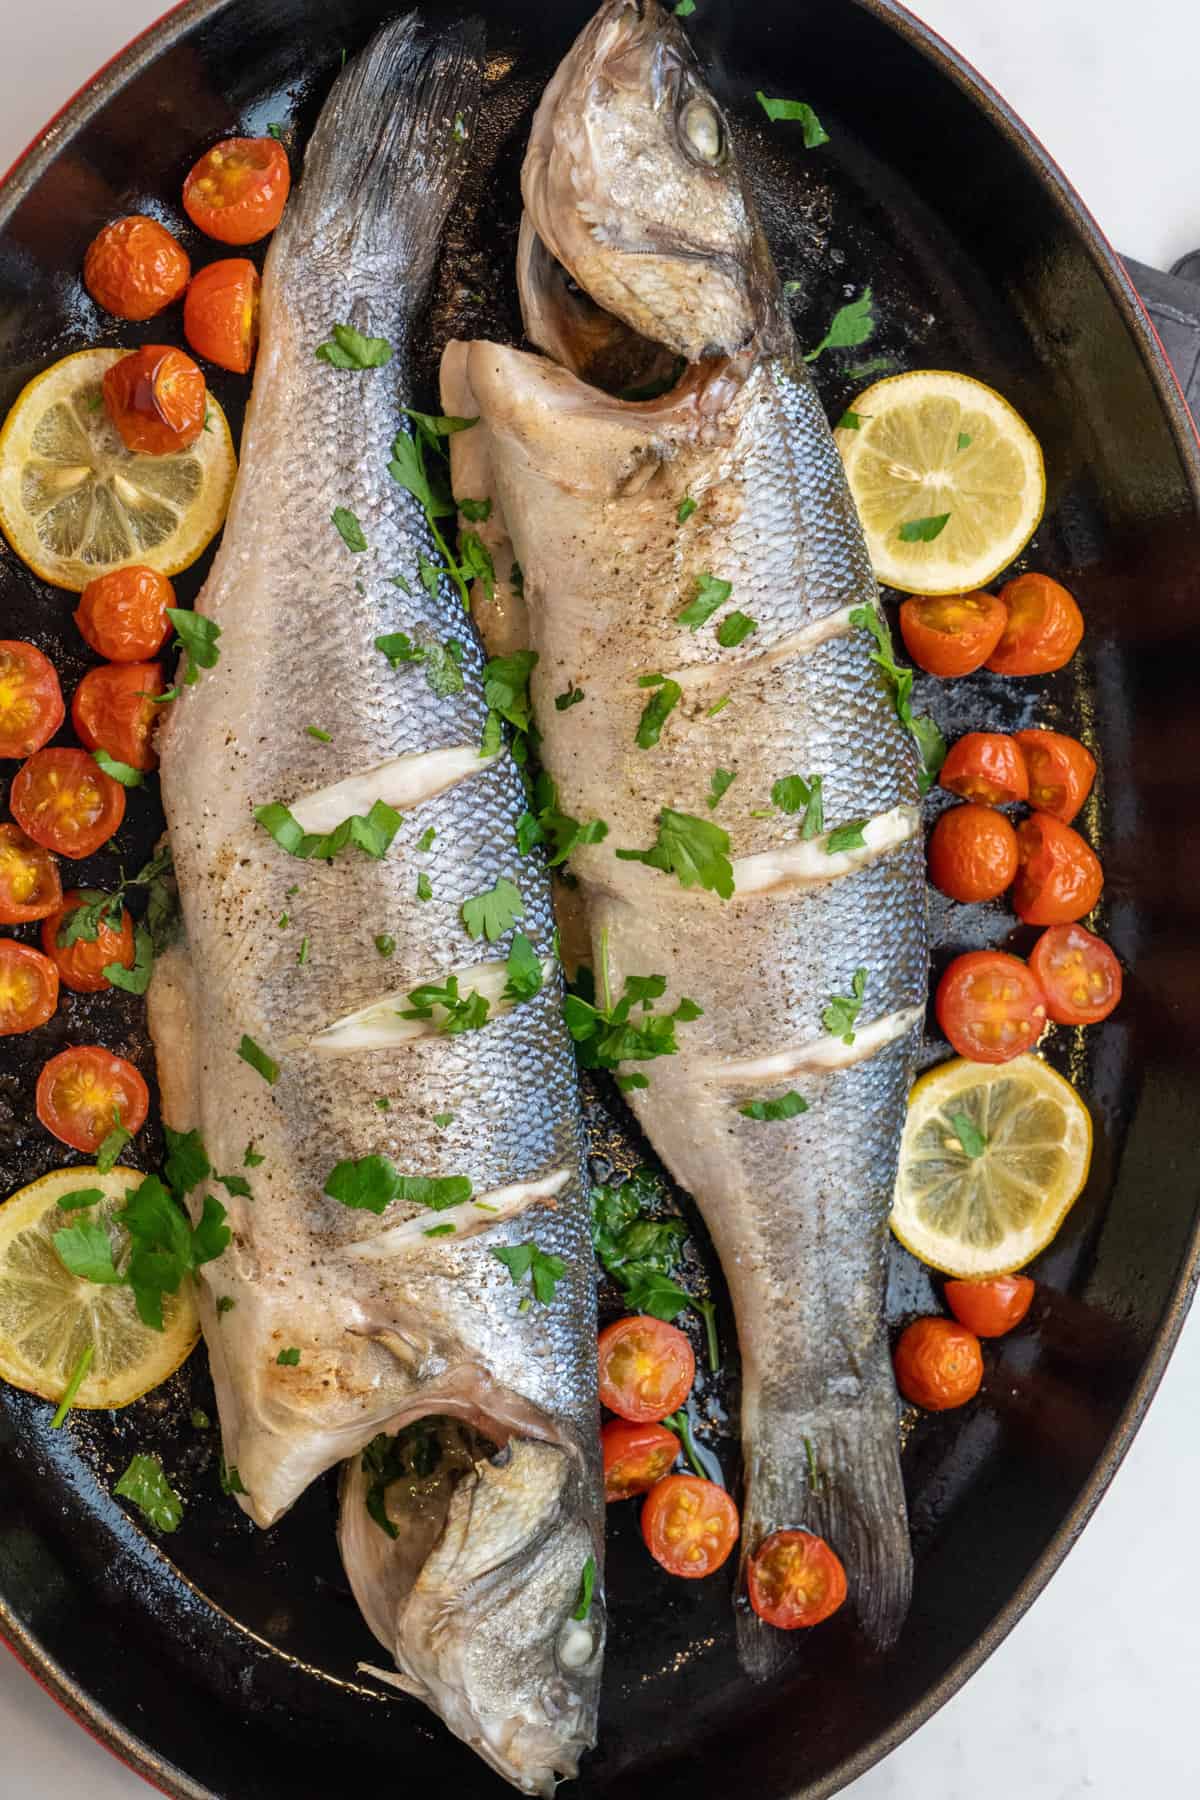 This Roasted Branzino with Butter Recipe is made with whole branzino, olive oil, cherry tomatoes, lemon slices, butter, parsley and baked to perfection.